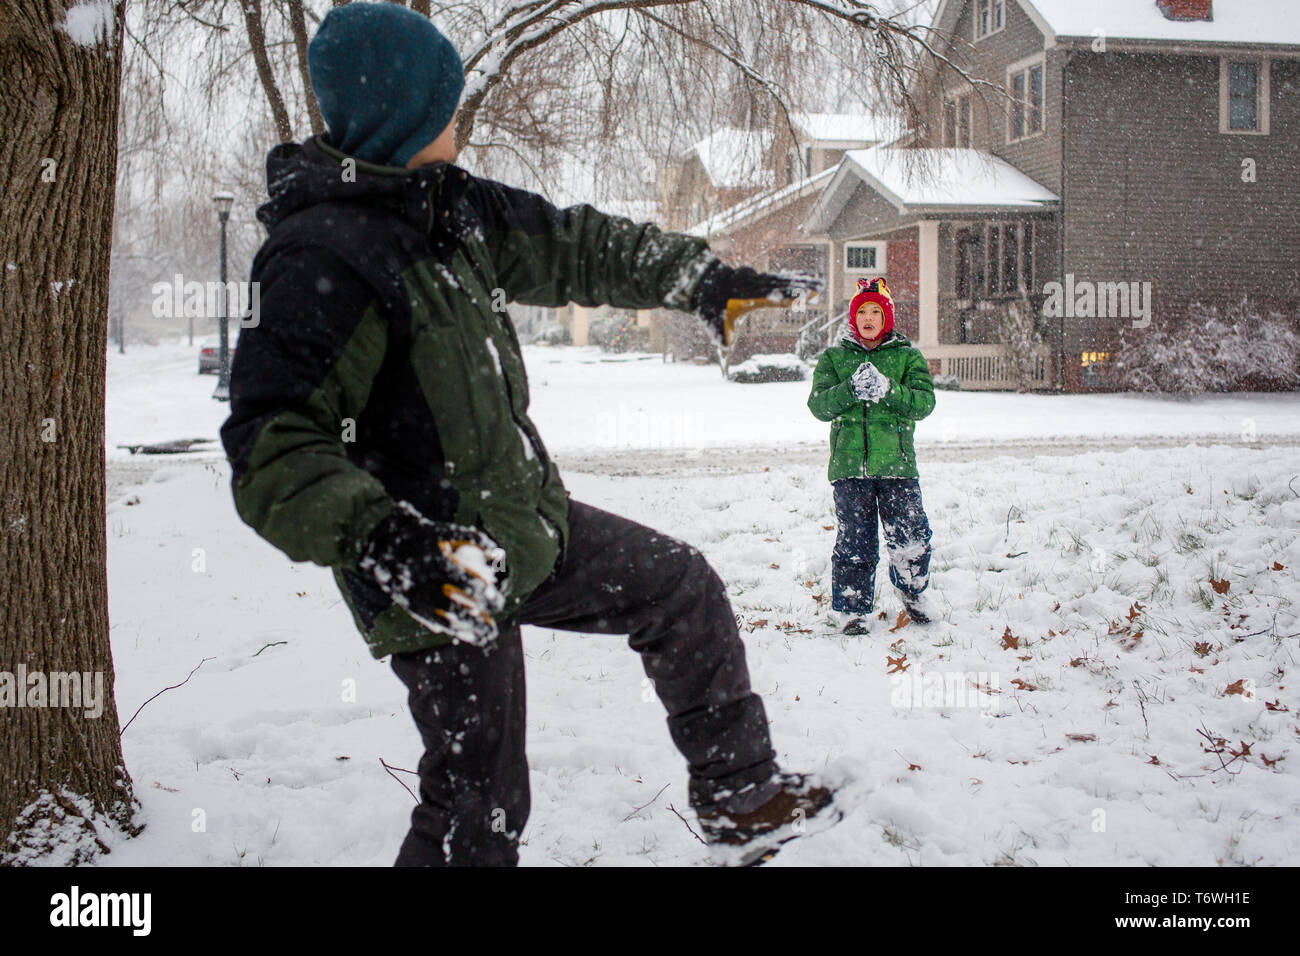 A father winds up to throw a snowball at son Stock Photo